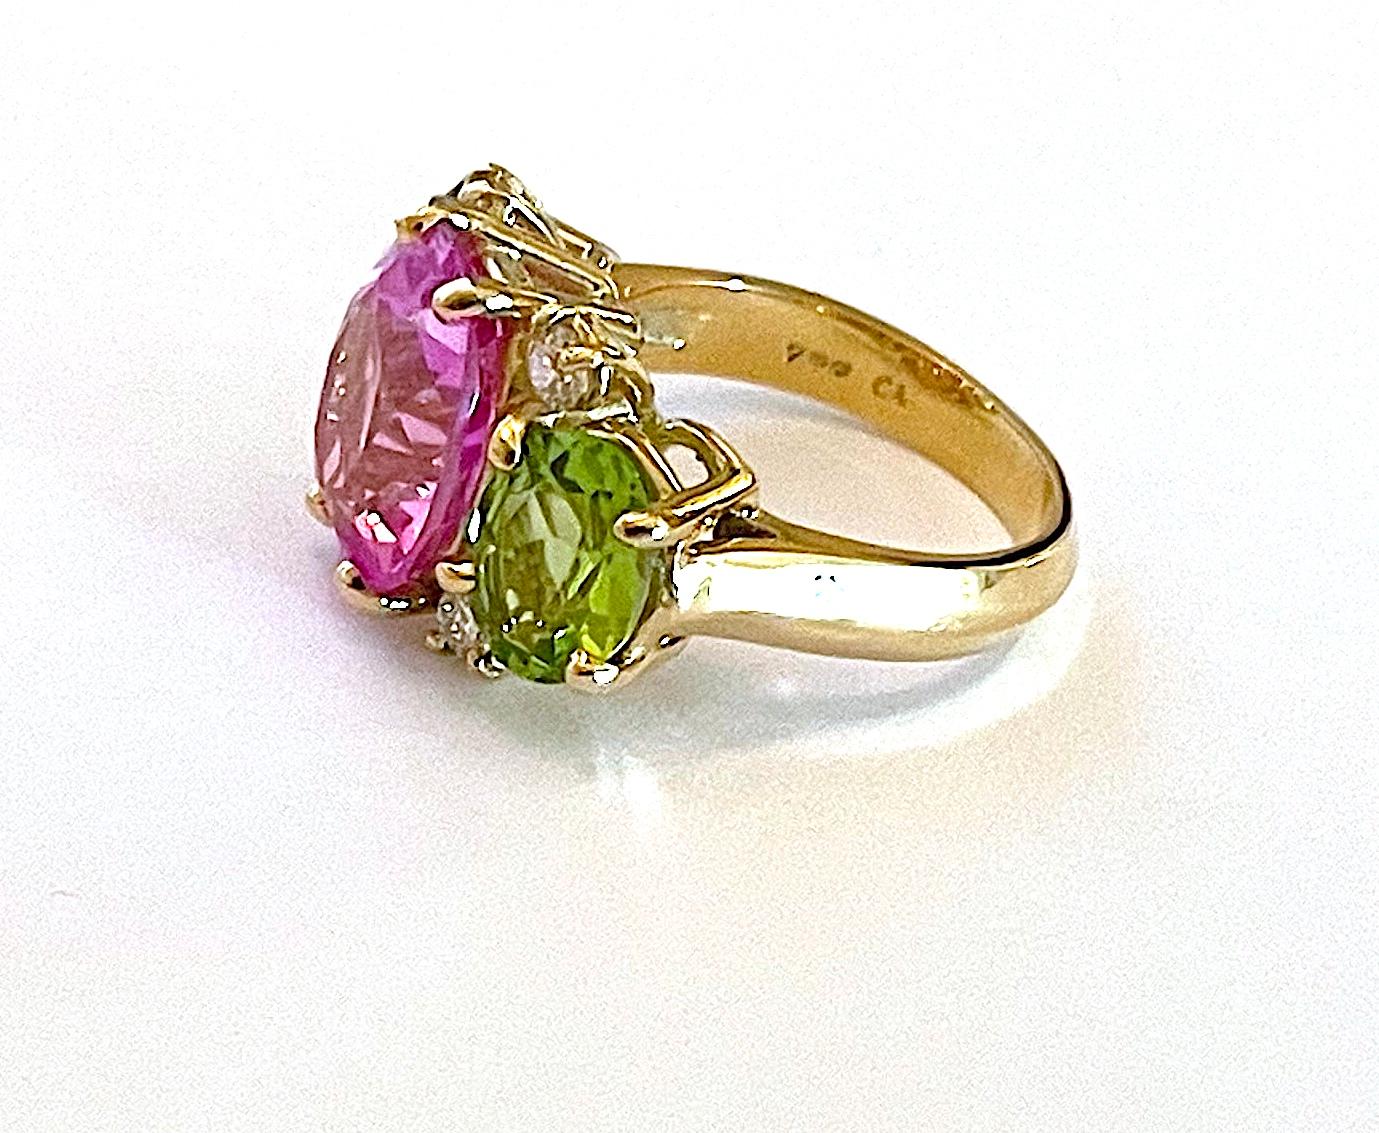 18kt Yellow Gold Small GUM DROP™ Ring with Pink Topaz (approx 4cts) and two Peridot (approx 5 cts) and Diamonds approximately~ 0.30cts

This beautiful ring measures ~ 1 1/2 